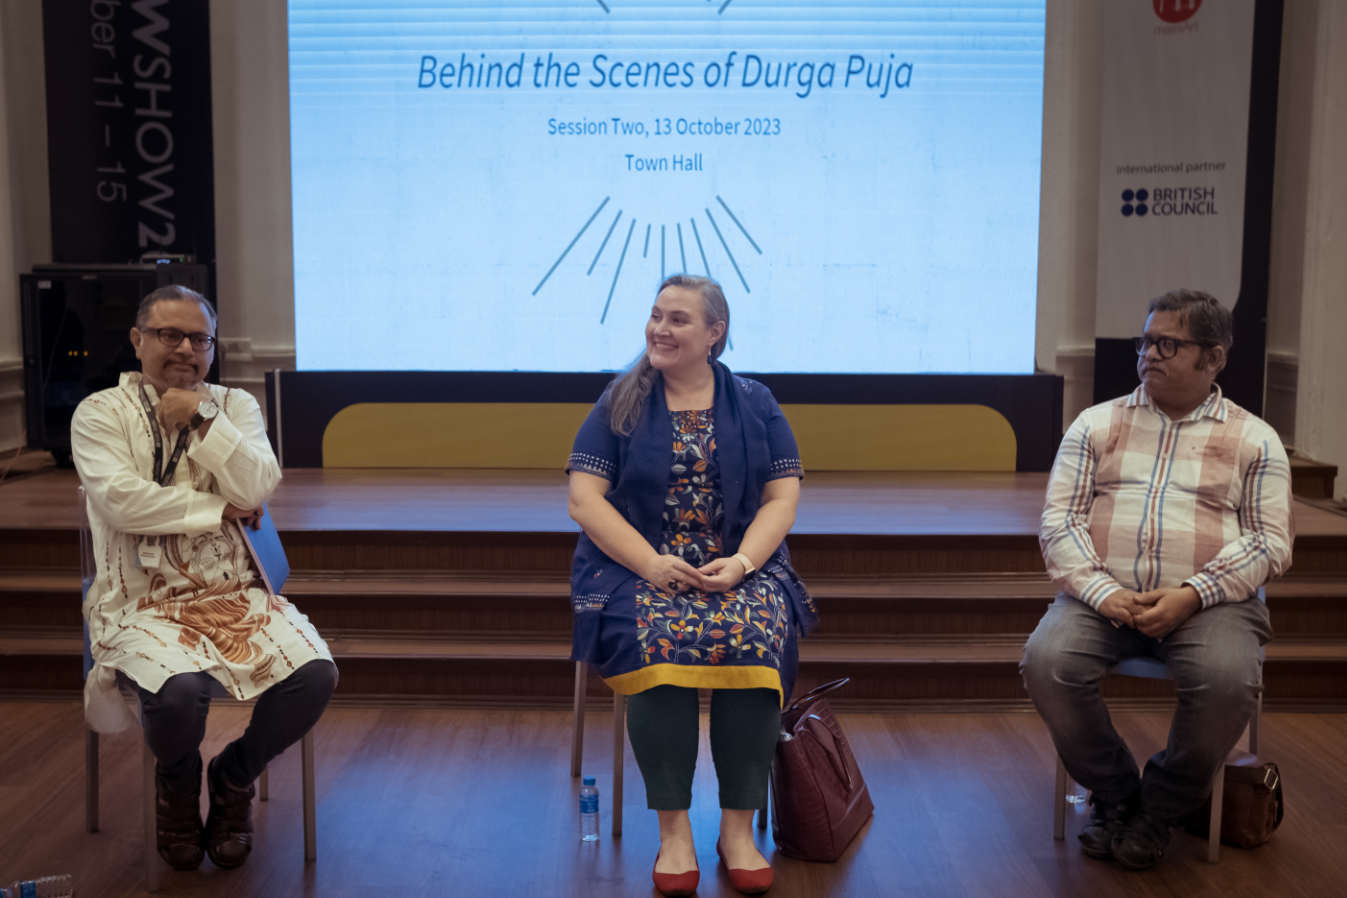 Three people sit in chairs onstage. Behind them is a screen showing a slide with the text “Behind the Scenes of Durga Puja, Session Two, 13 October 2023, Town Hall”.